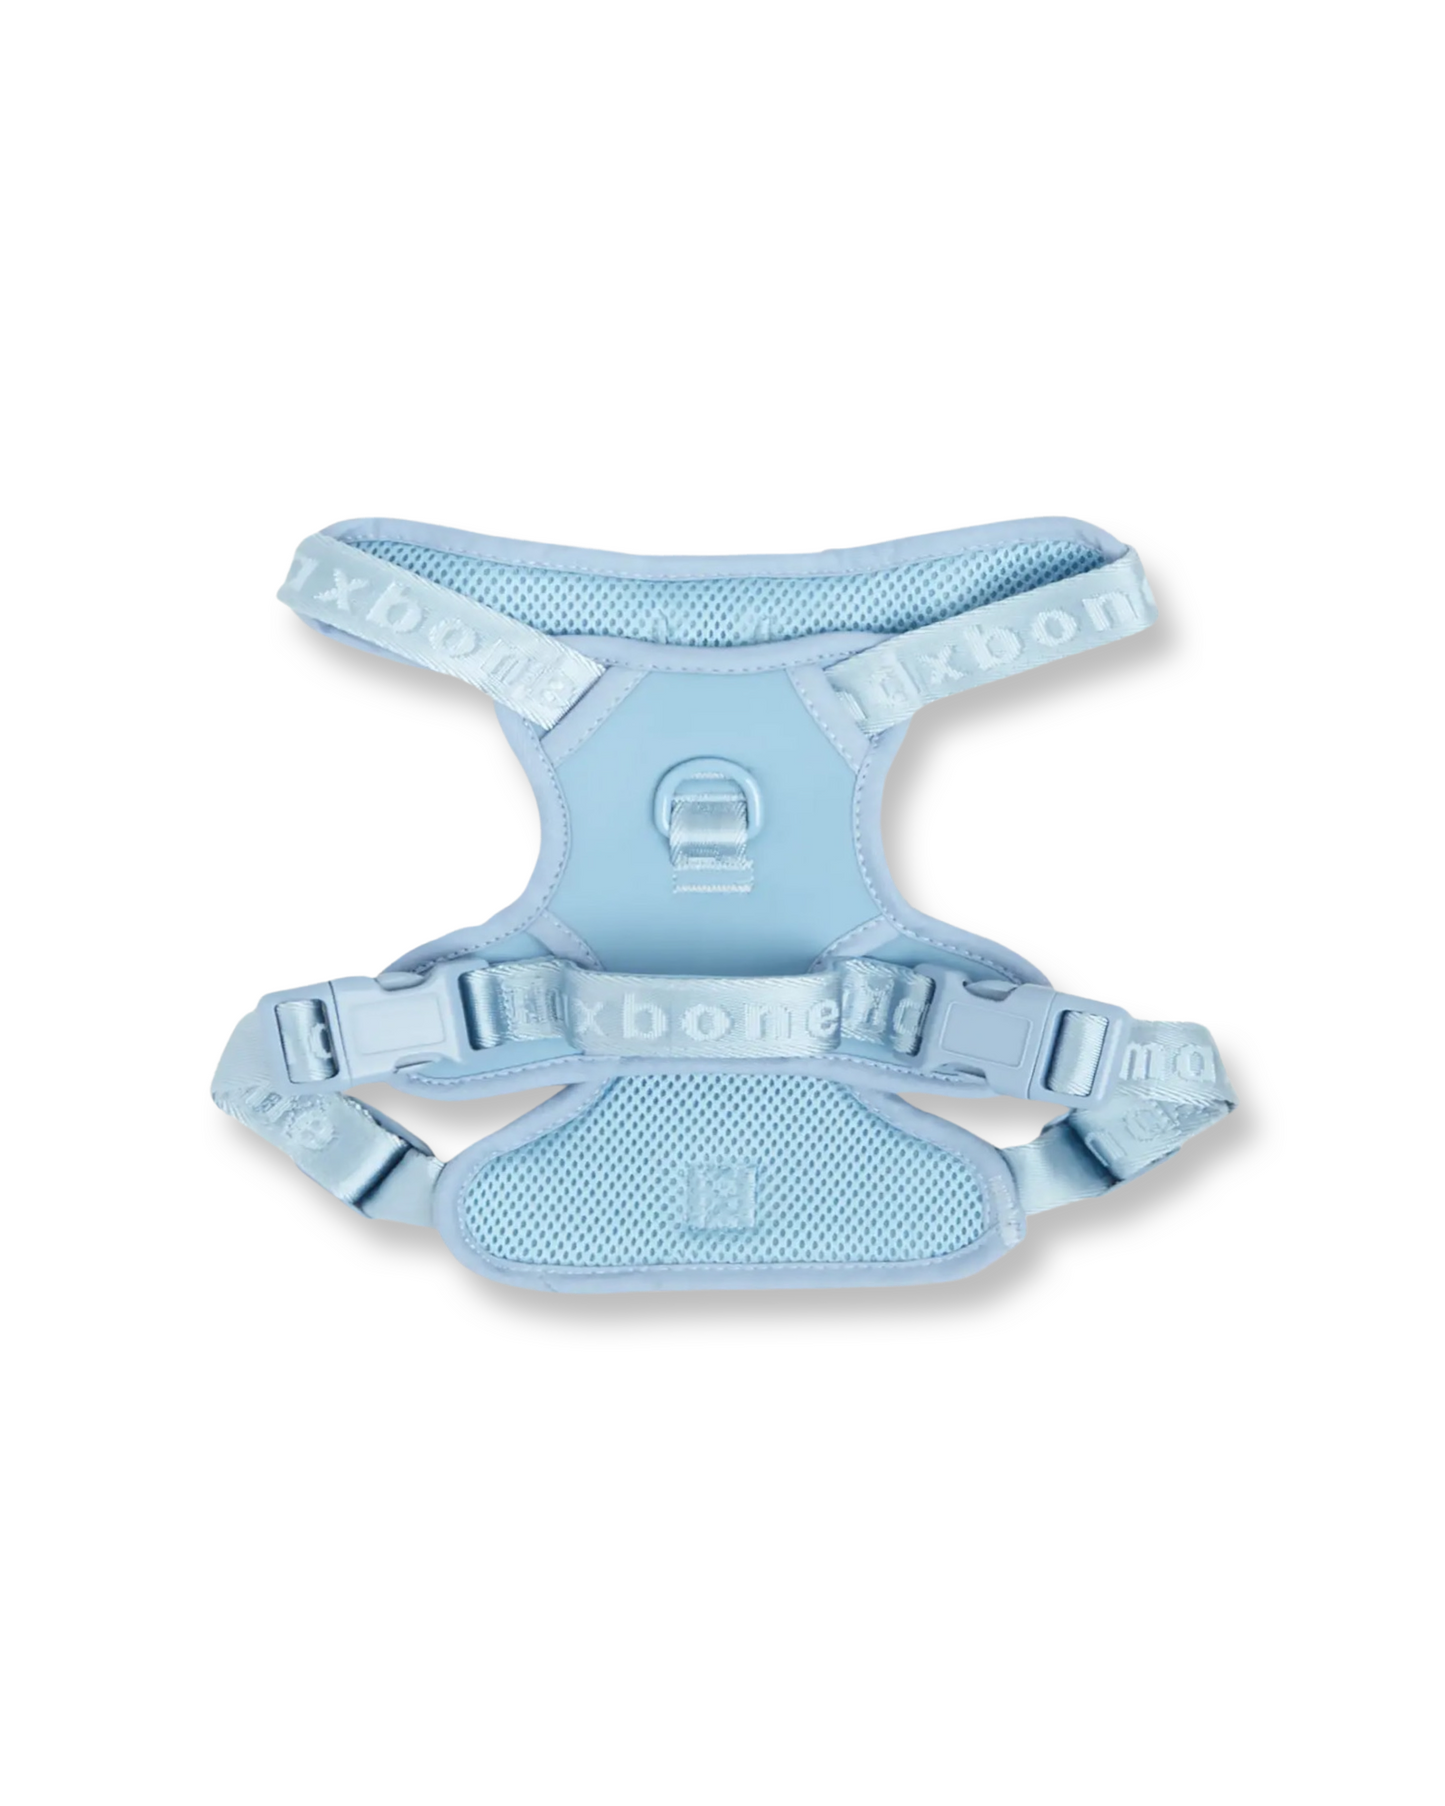 Easy Fit Harness - Dusk Blue